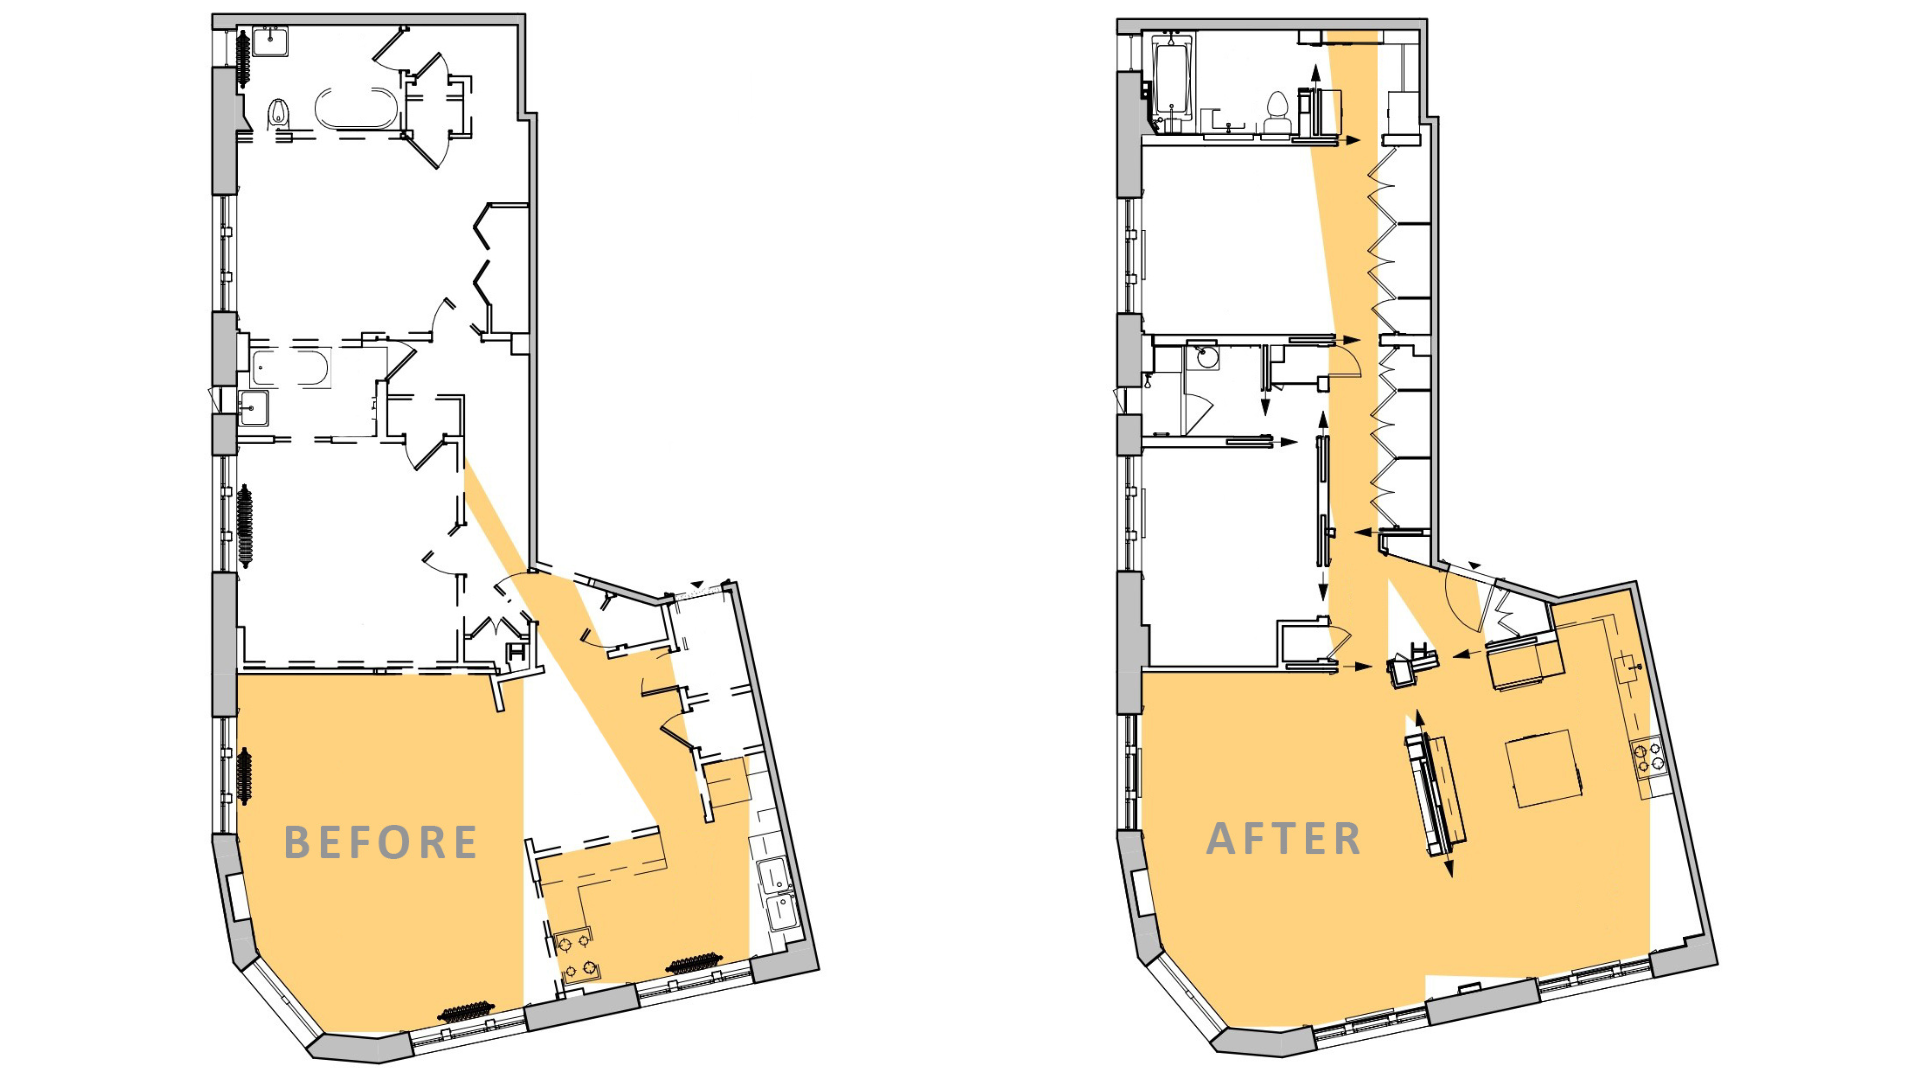 Before and after diagrams of a renovated two-bedroom, two-bath apartment on the Equinox illustrate how, by relocating walls and doorways, 40% more light enters the apartment.